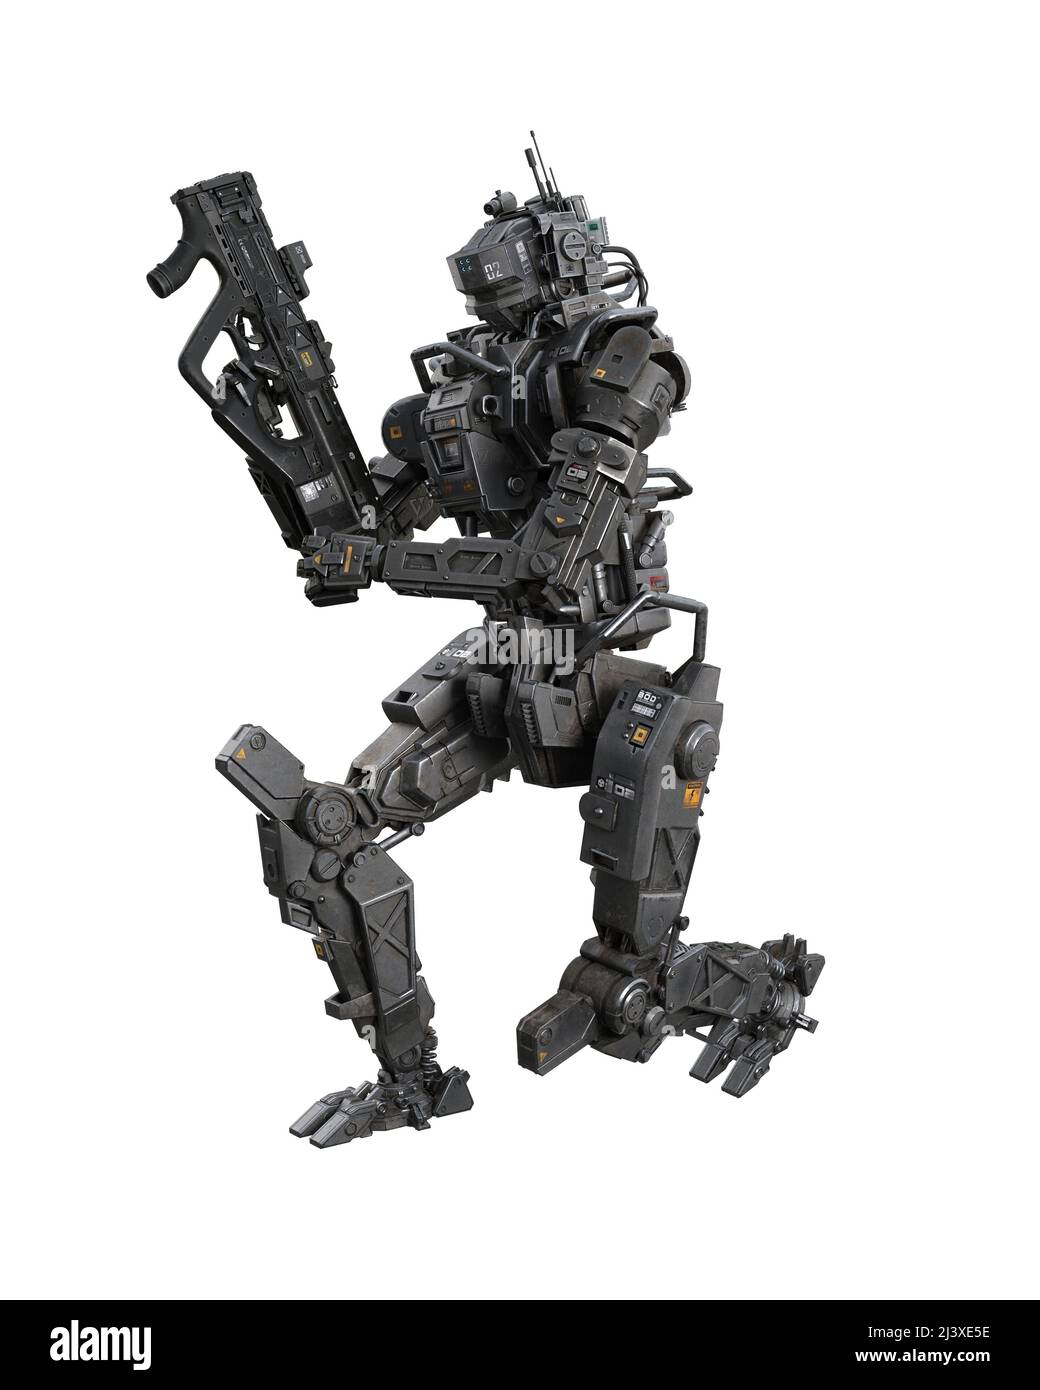 Blive kold Nordamerika tømmerflåde Fantasy future cyberpunk droid robot loading a submachine gun. 3D  illustration isolated on white background with clipping path Stock Photo -  Alamy